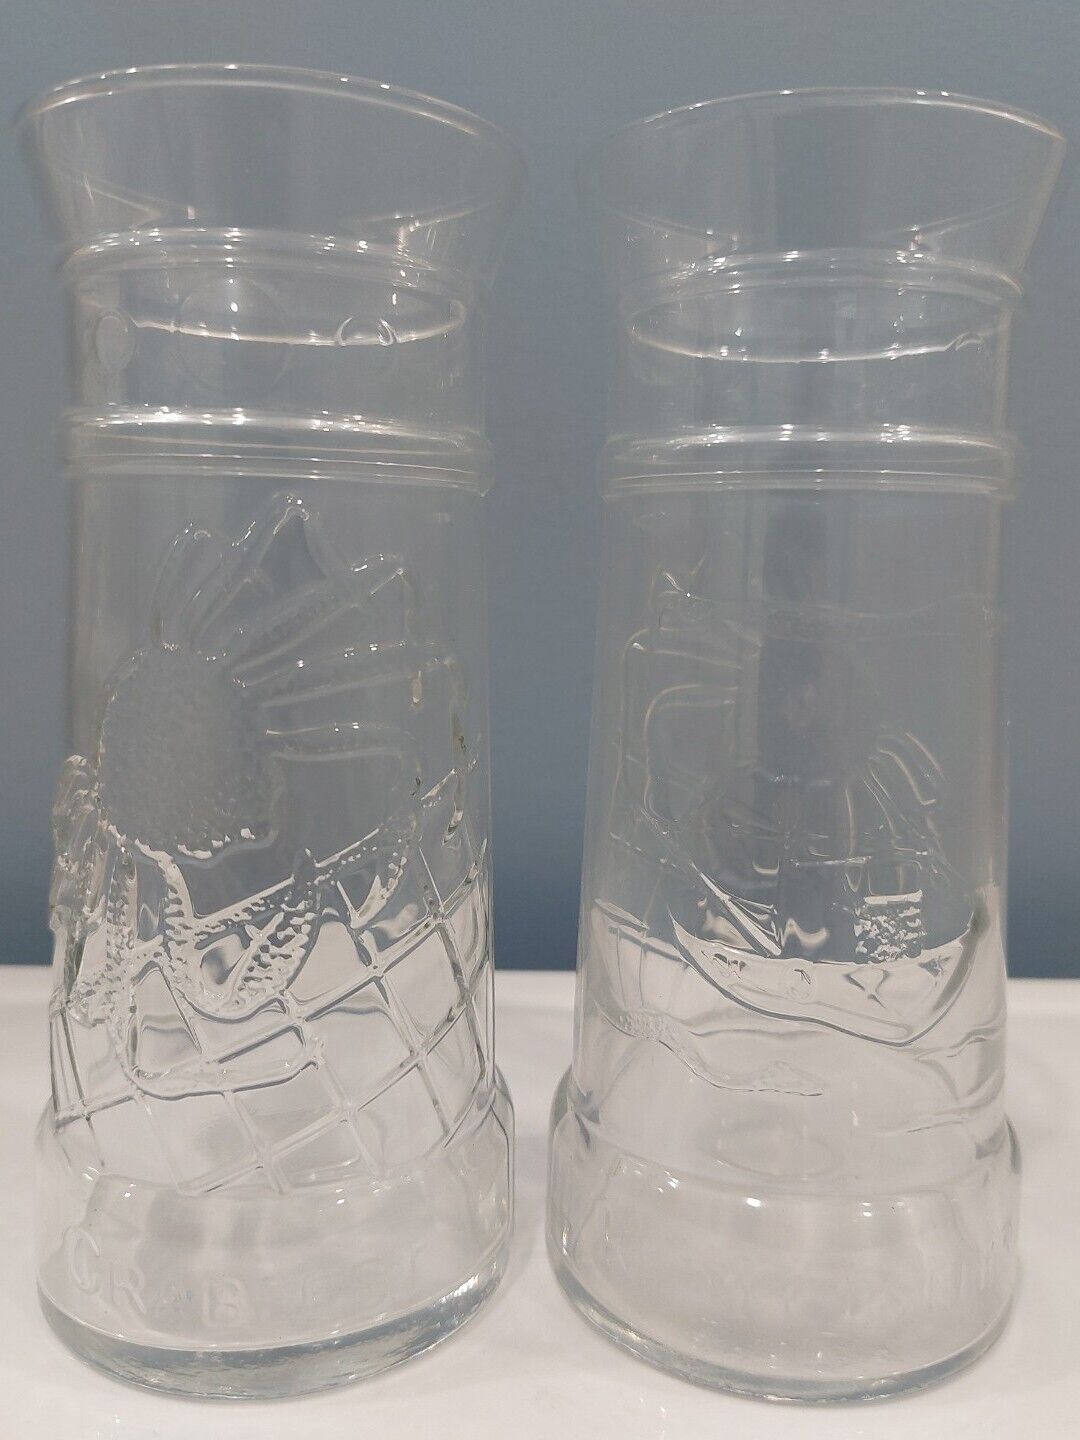 PAIR Red Lobster Embossed Lighthouse Crabfest Glass Tumblers Crab Sailboat